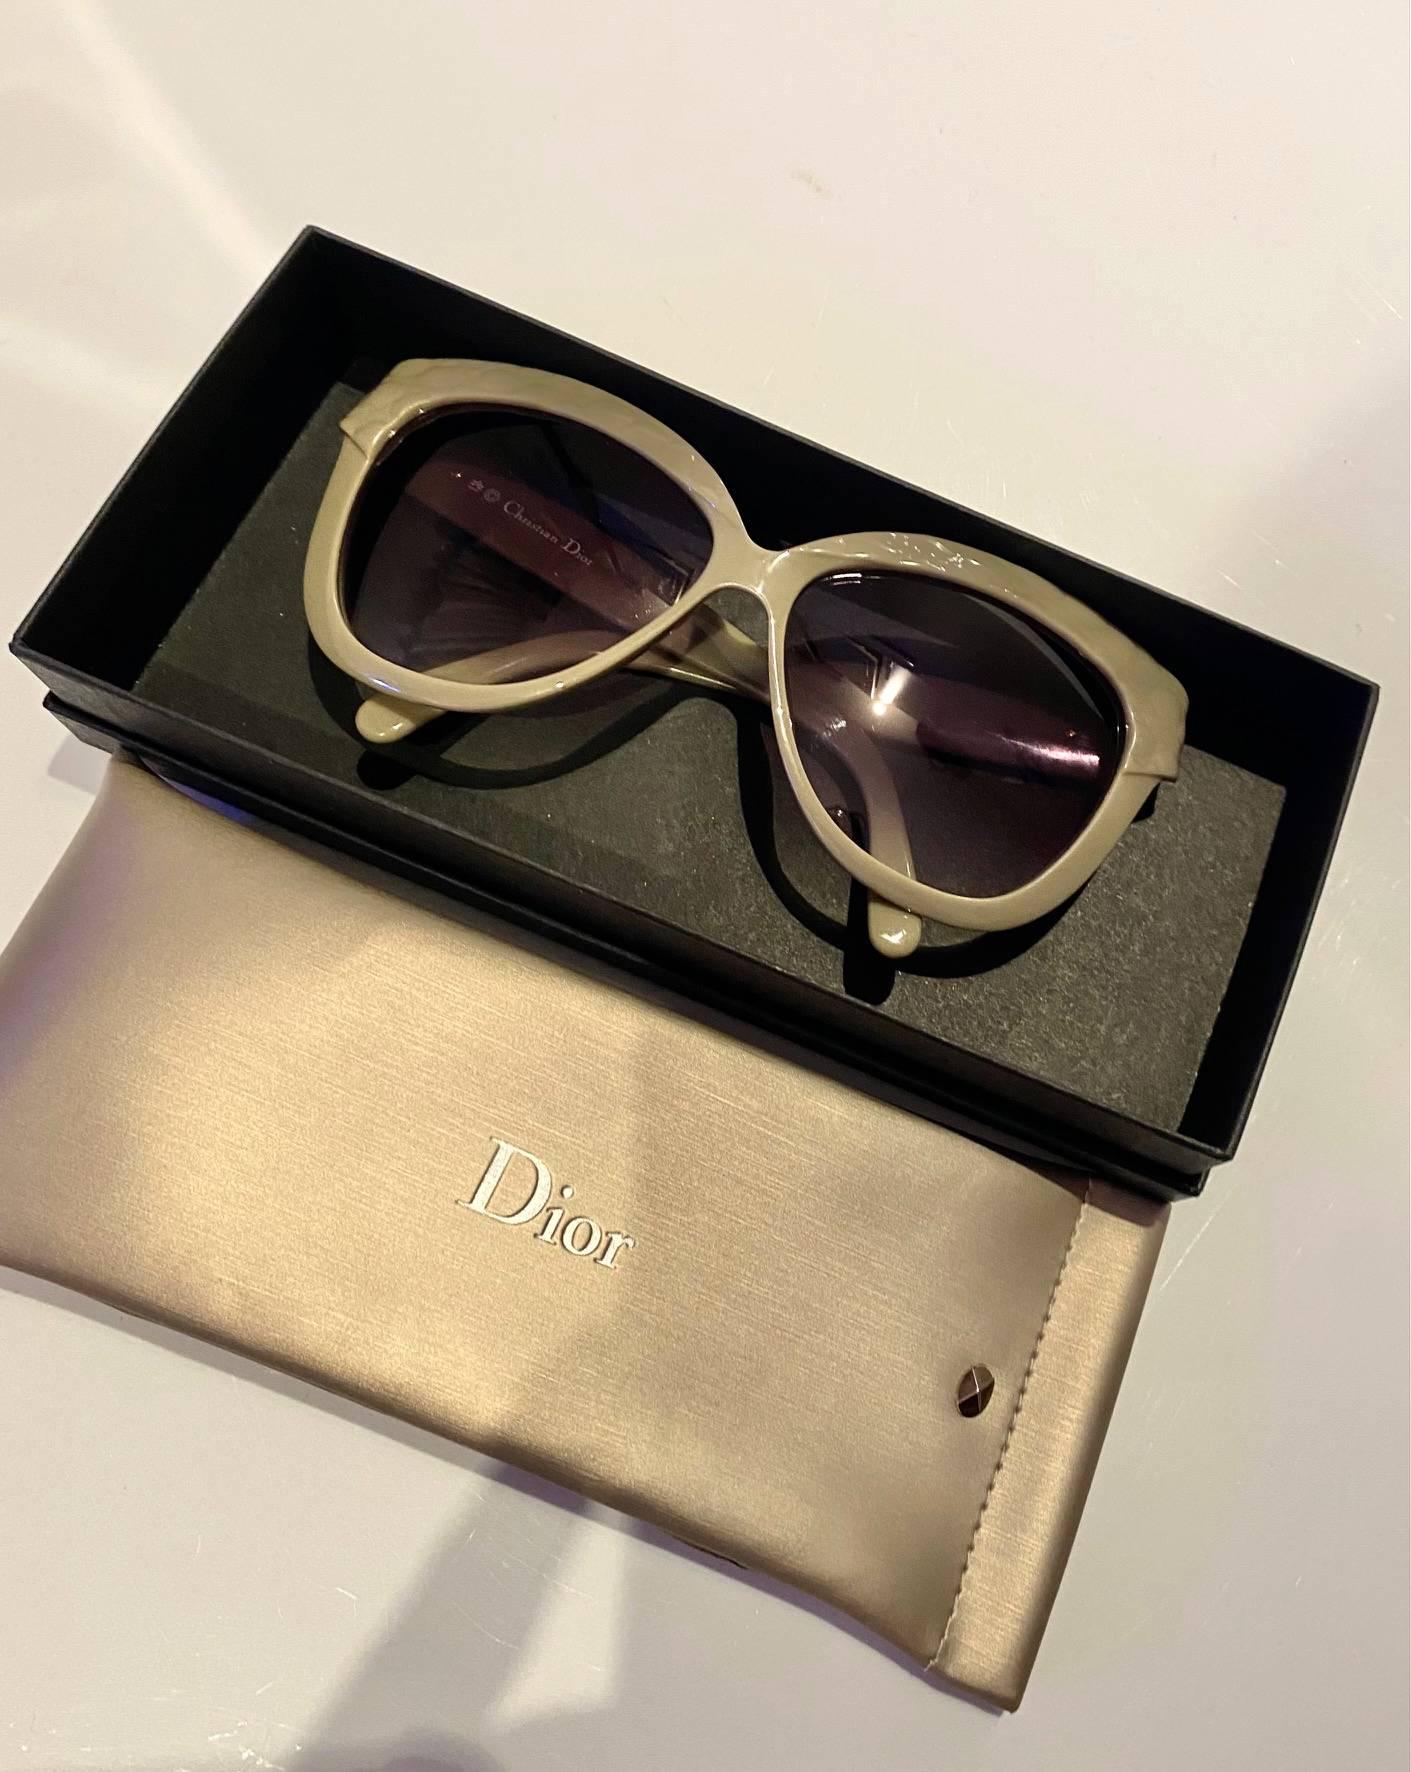 1990s Christian Dior Sunglasses, green frame of Cannage pattern, cat-eye design, brown lenses, CD metal logo on both temples, Made in Germany 

Condition: 1990s, vintage, like new, original Dior pouch 

Measurements:
- Width inner hinge to inner